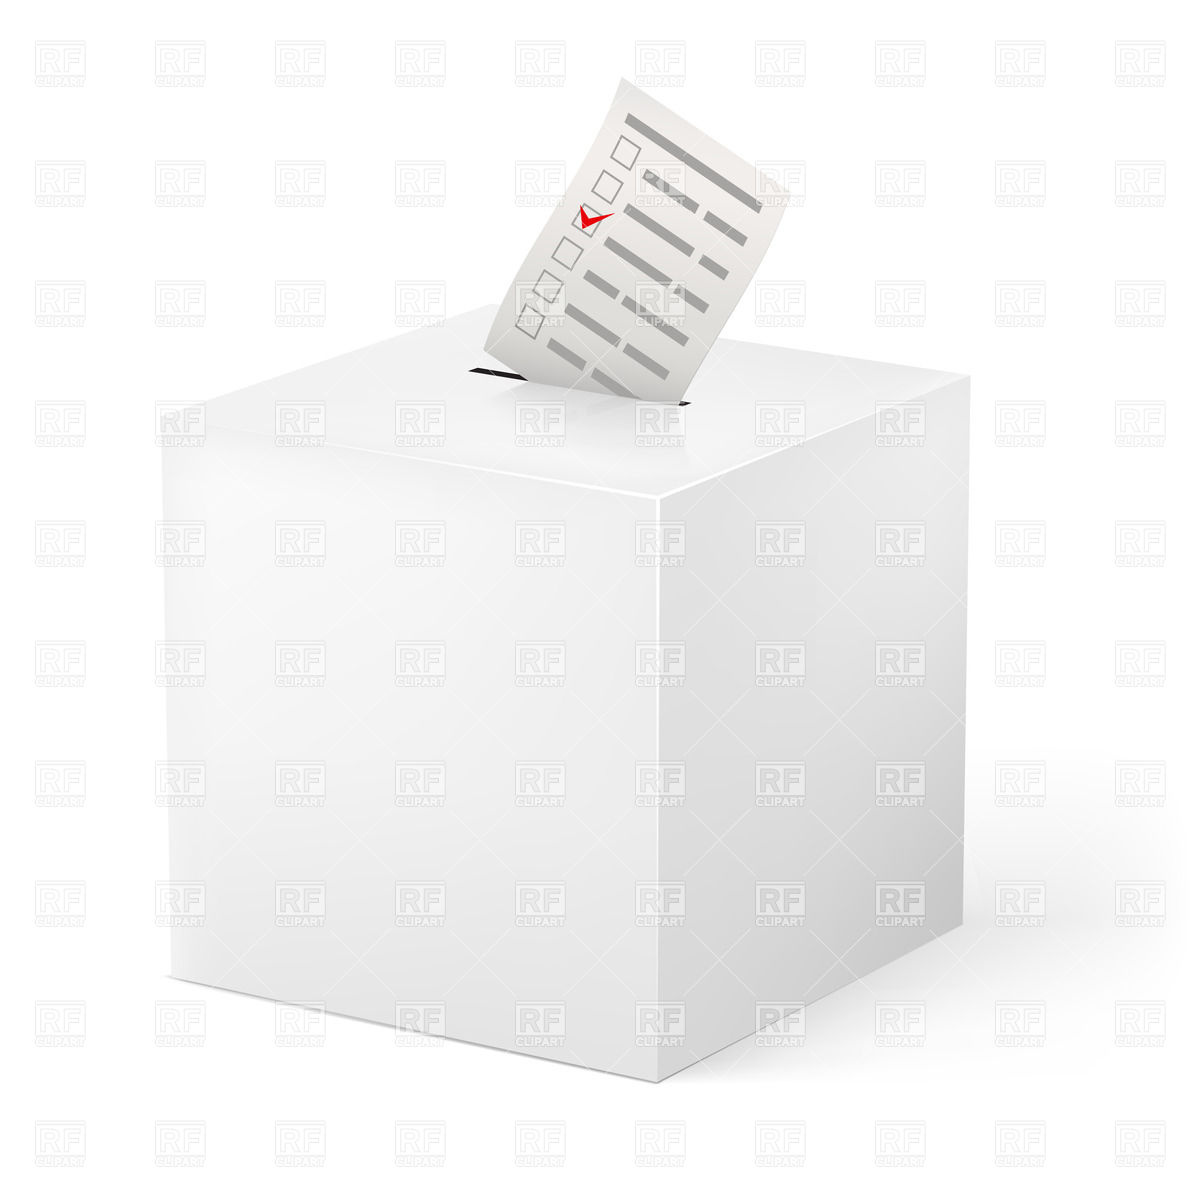 Box With Ballot Paper   Voting Download Royalty Free Vector Clipart